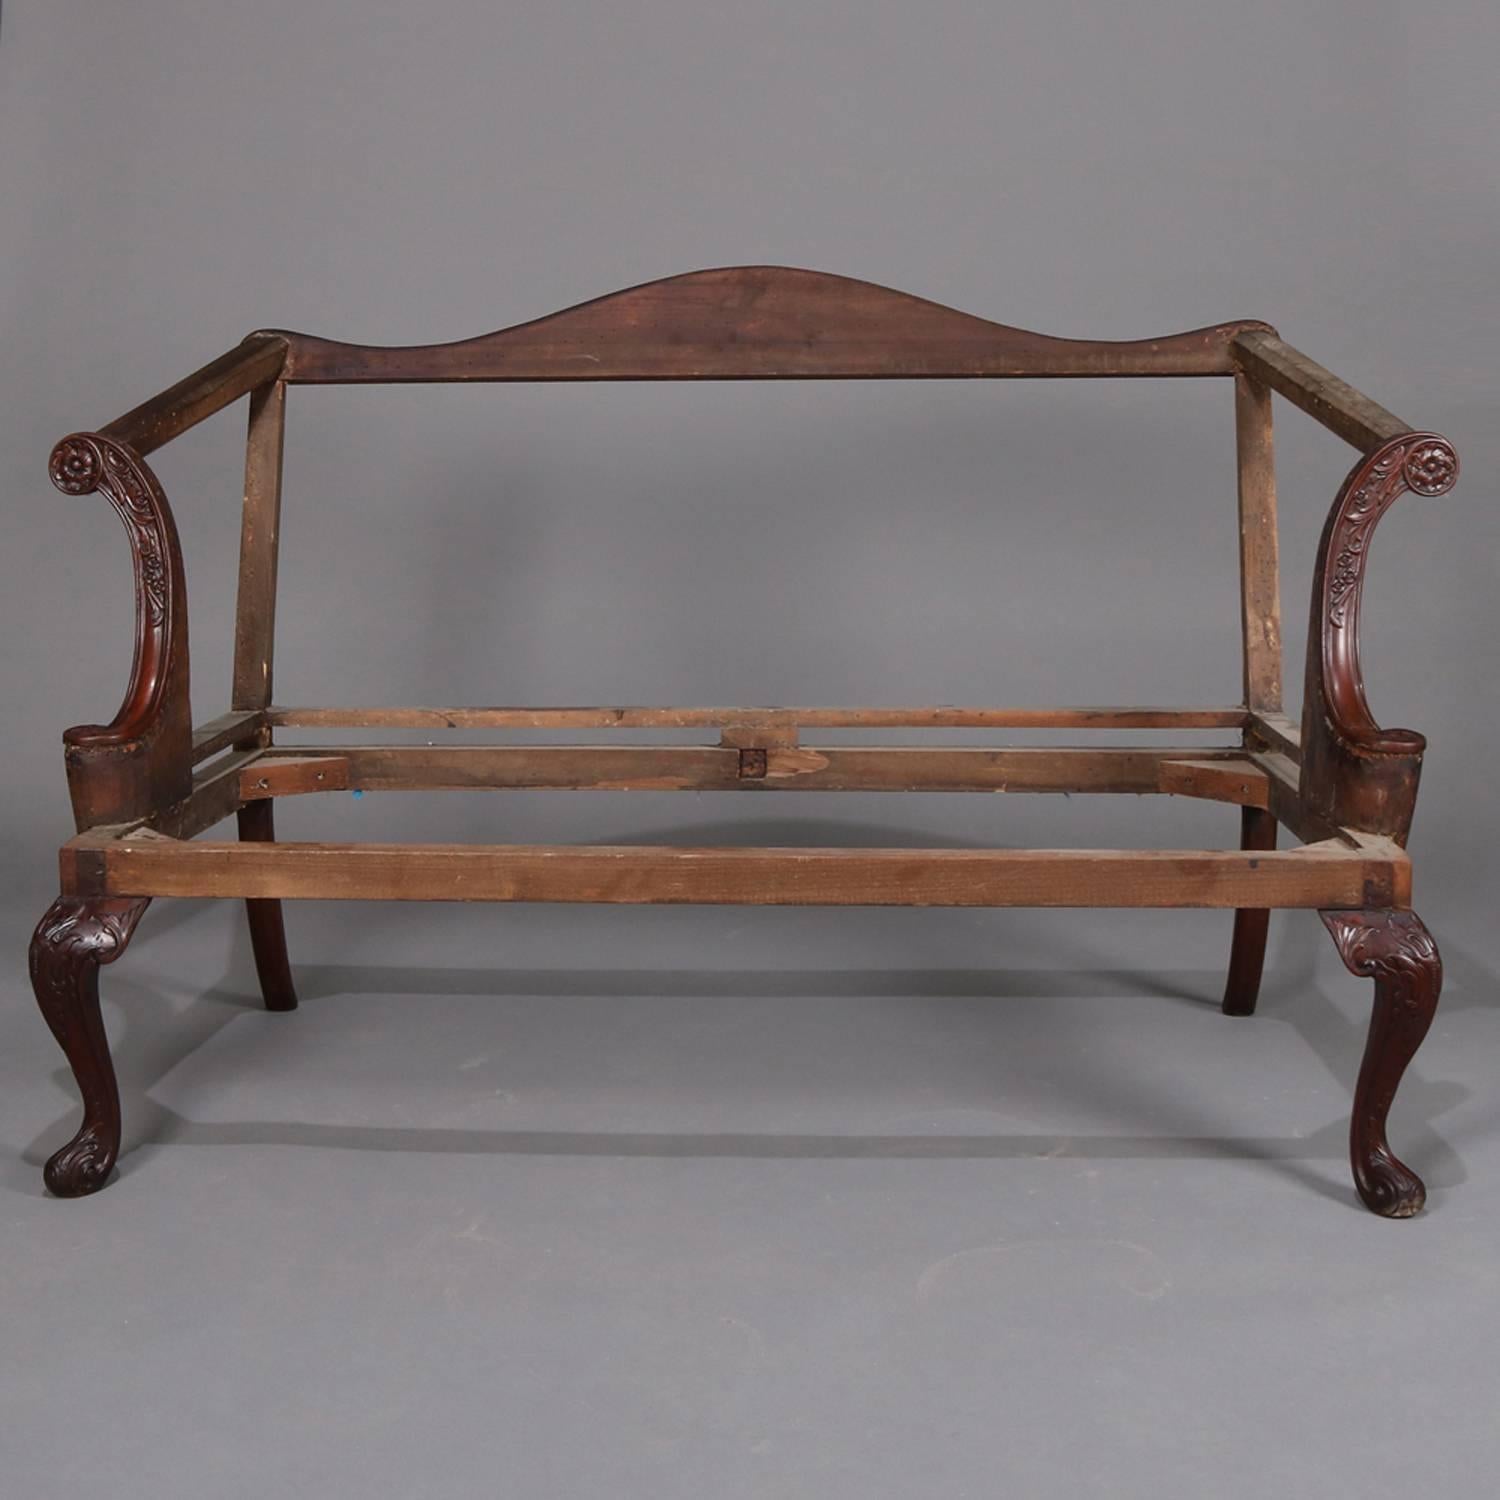 19th Century English Floral & Foliate Carved Mahogany Queen Anne Settee Frame, circa 1820